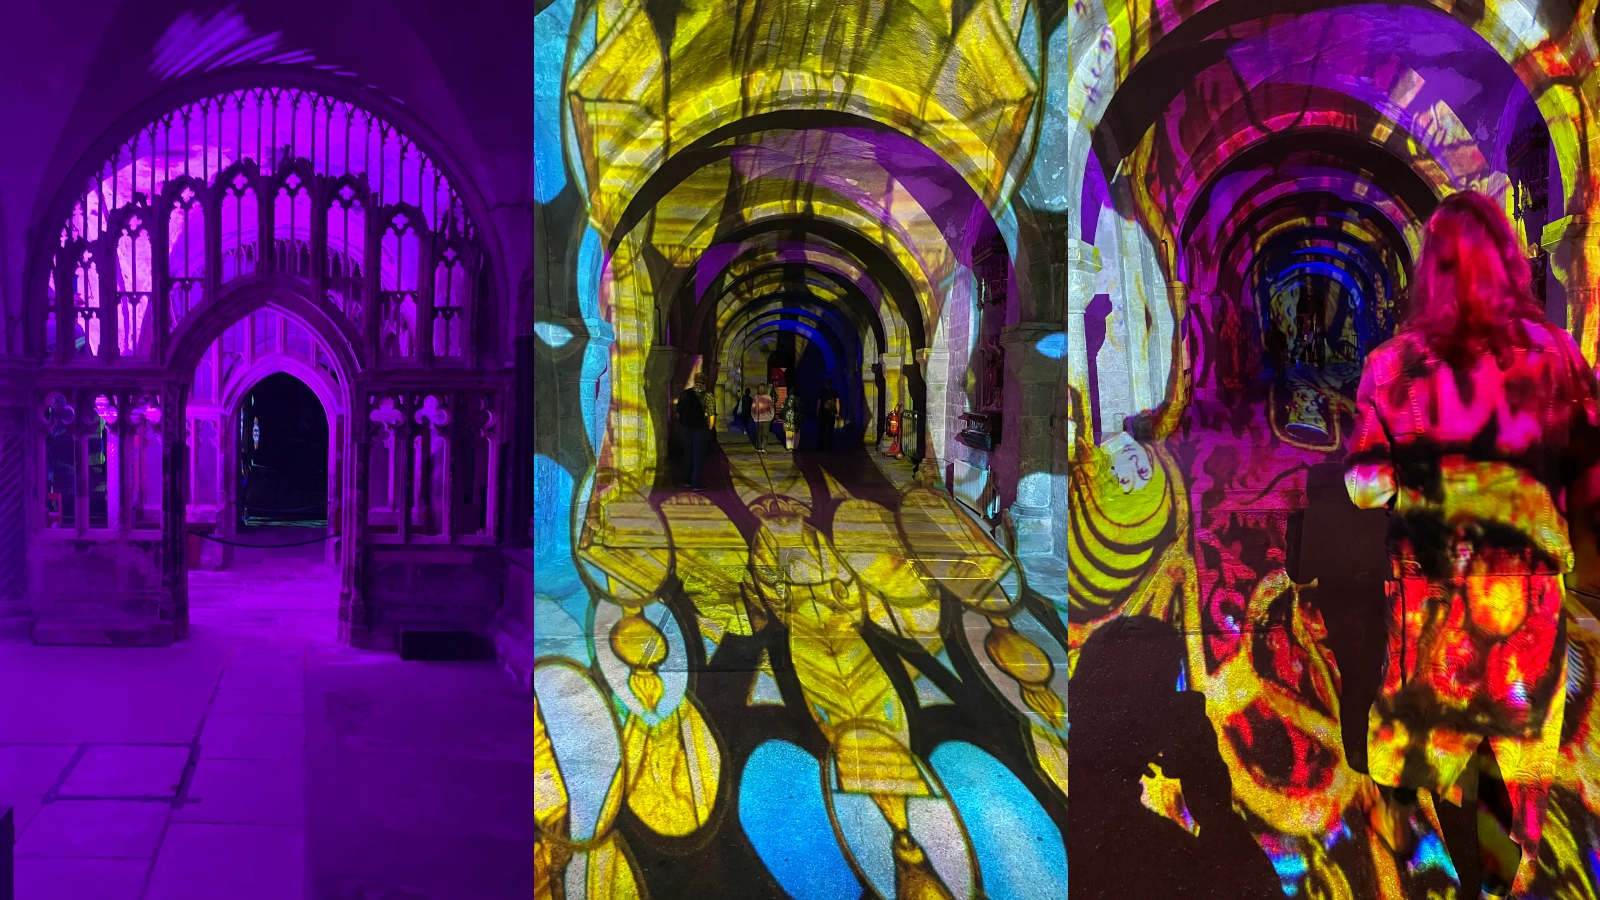 Canterbury Cathedral crypt - Luxmuralis light projection montage of light saturated images